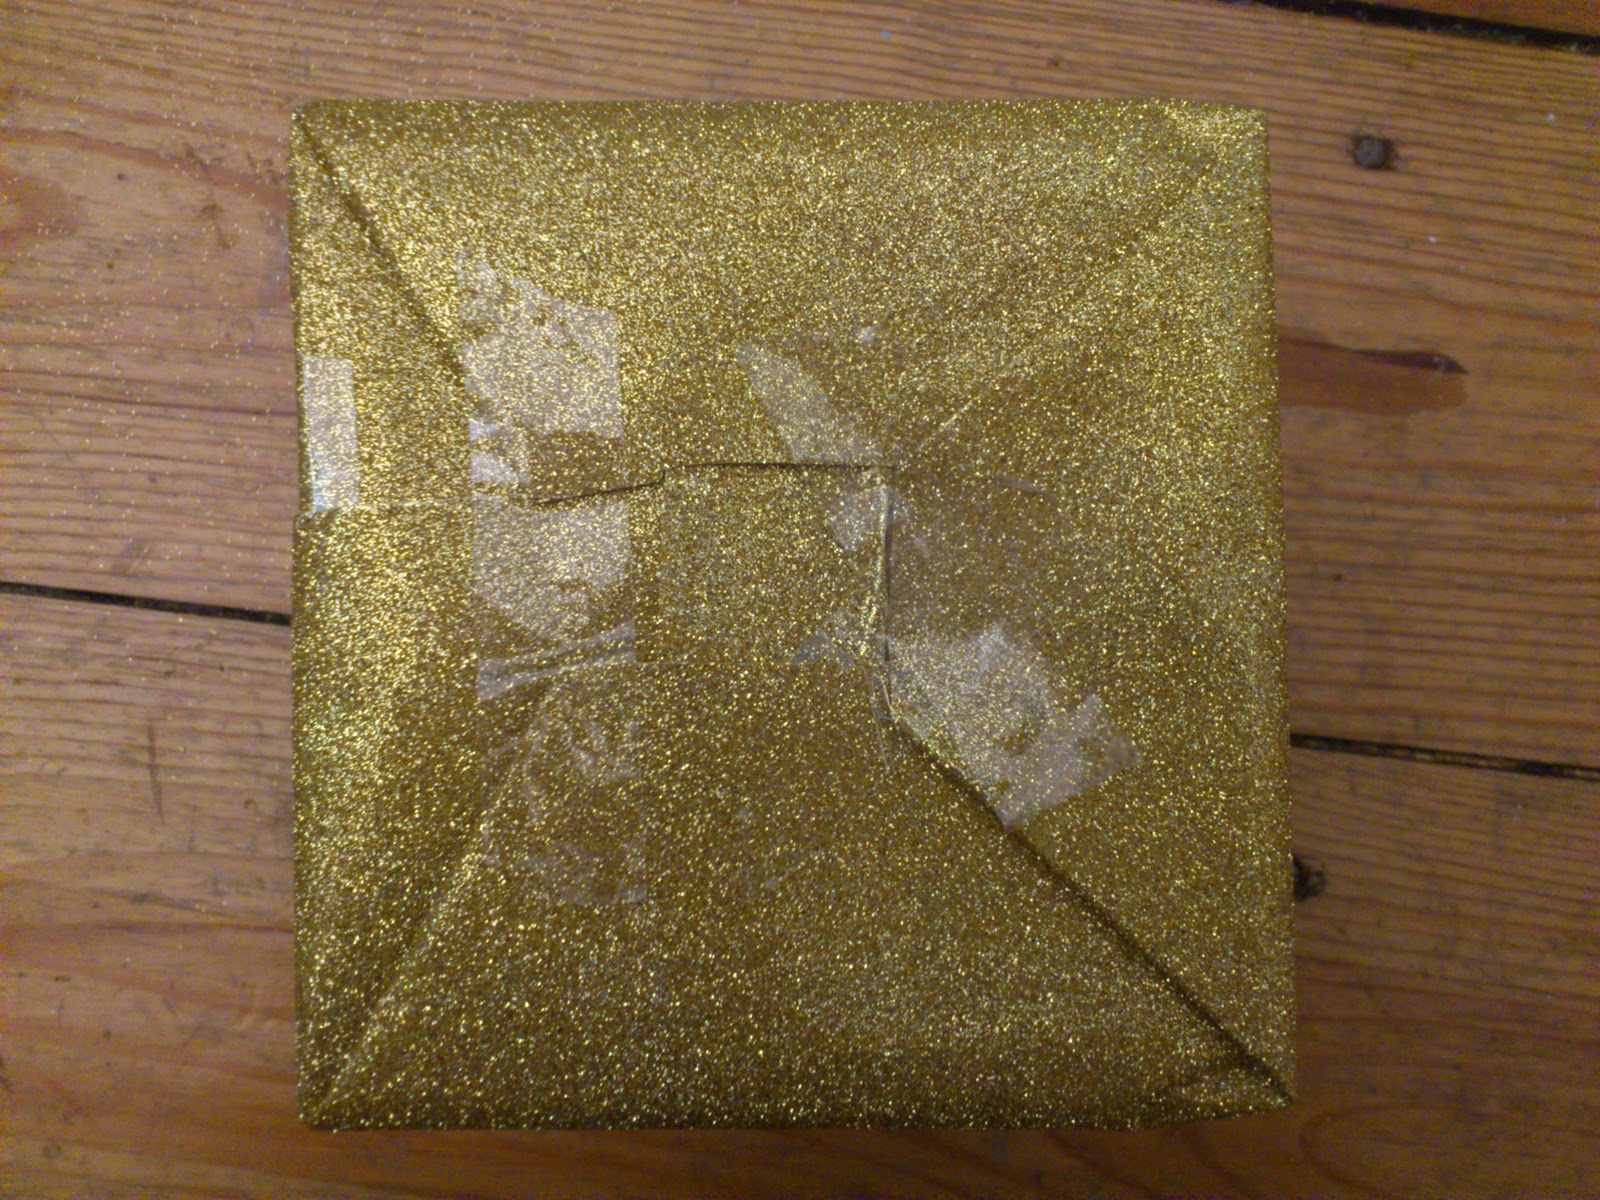 In Colorful Waters: The Glitter Wrapping Paper Dilemma